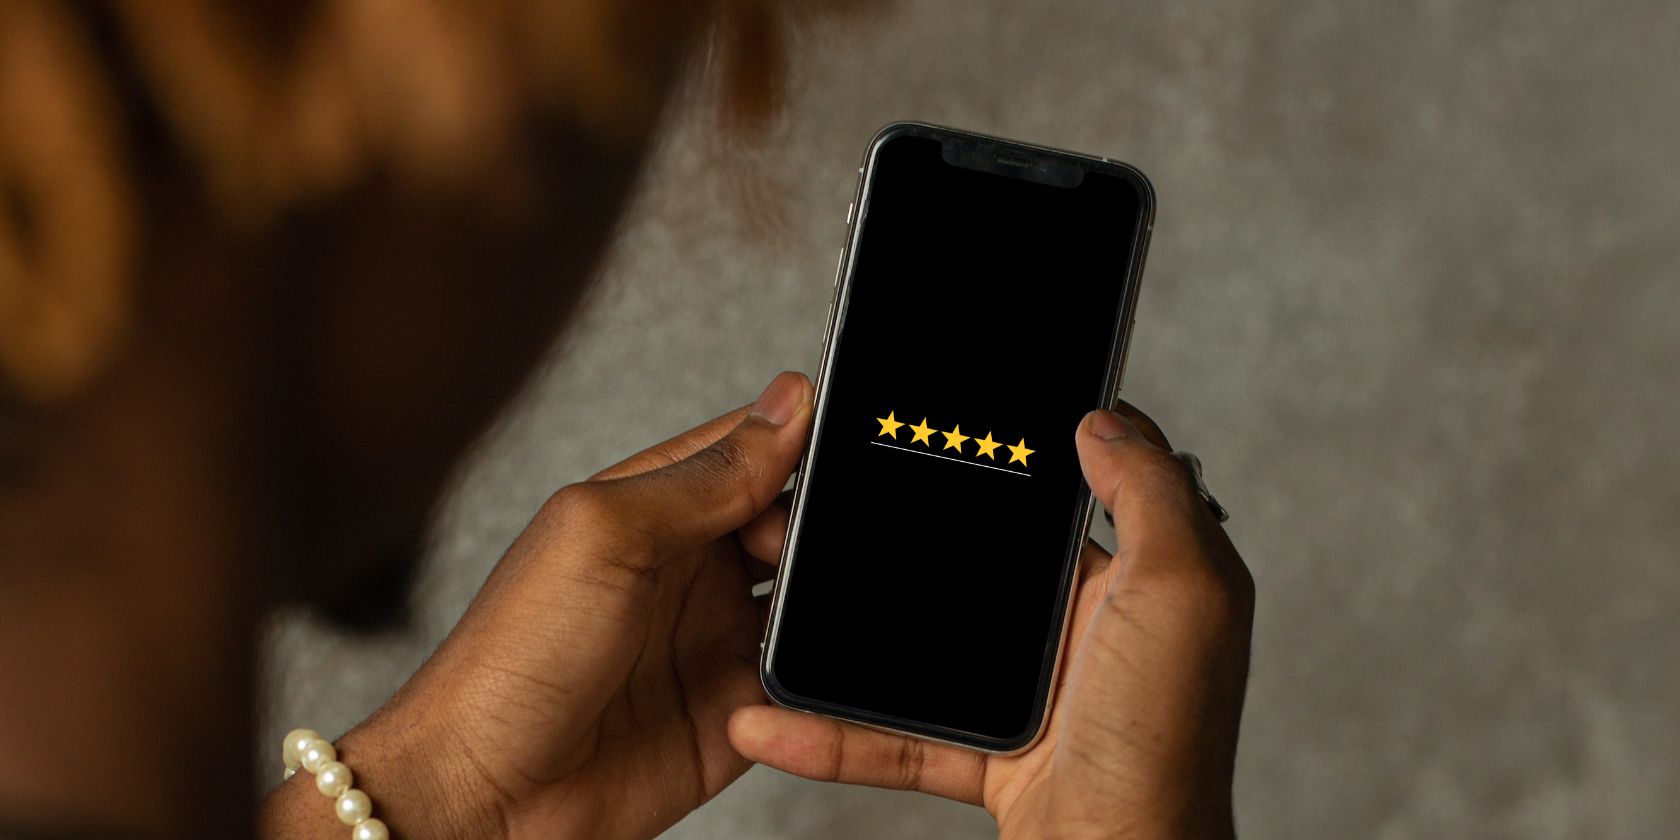 Man holding an iPhone with 5 gold stars on screen